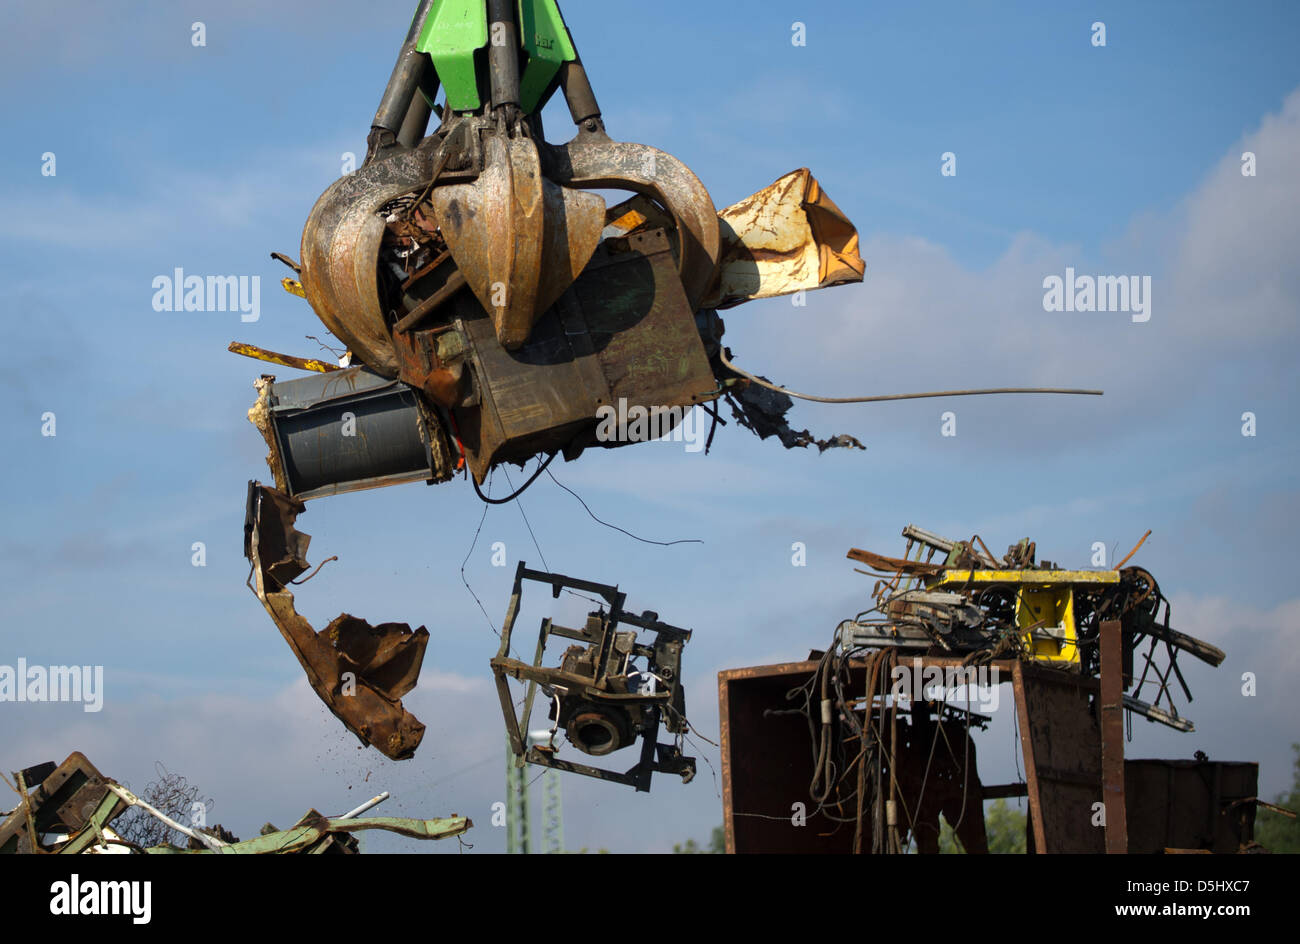 The artwork by documenta artist Lara Favaretto which consisted of a scrap heap is removed in Kassel, Germany, 18 September 2012. After 100 days, the documenta (13) art exhibition ended on 16 September 2012. Photo: Uwe Zucchi Stock Photo